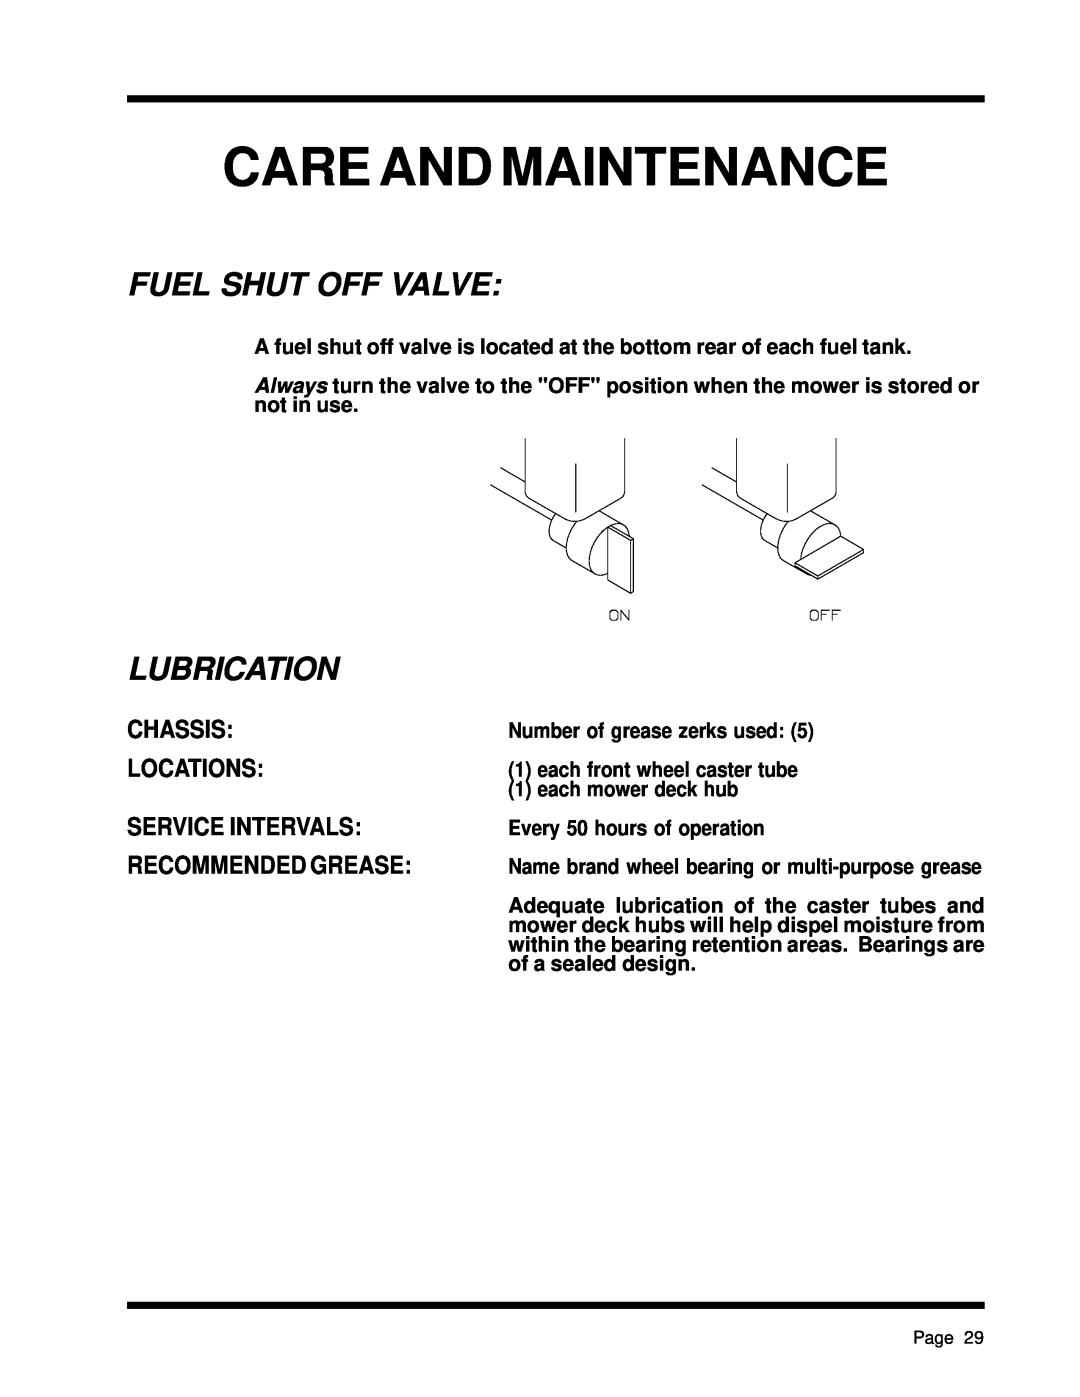 Dixon ZTR 5425, ZTR 5023 manual Fuel Shut Off Valve, Lubrication, Care And Maintenance, Chassis Locations 